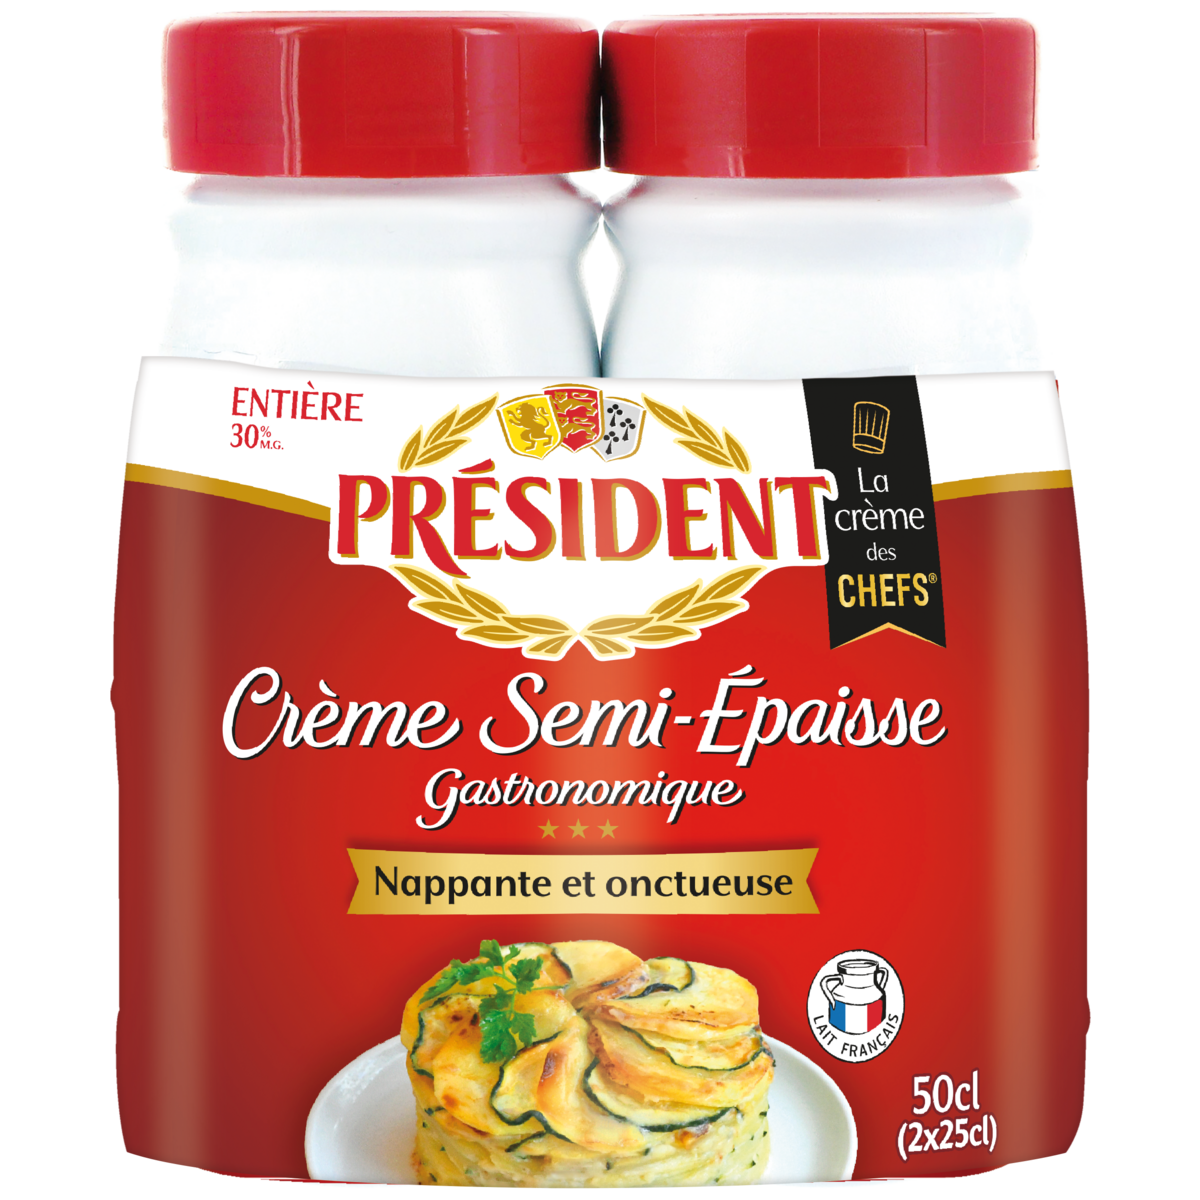 President Gourmet Semi-thick Whole Cream 30%MG 2x25cl